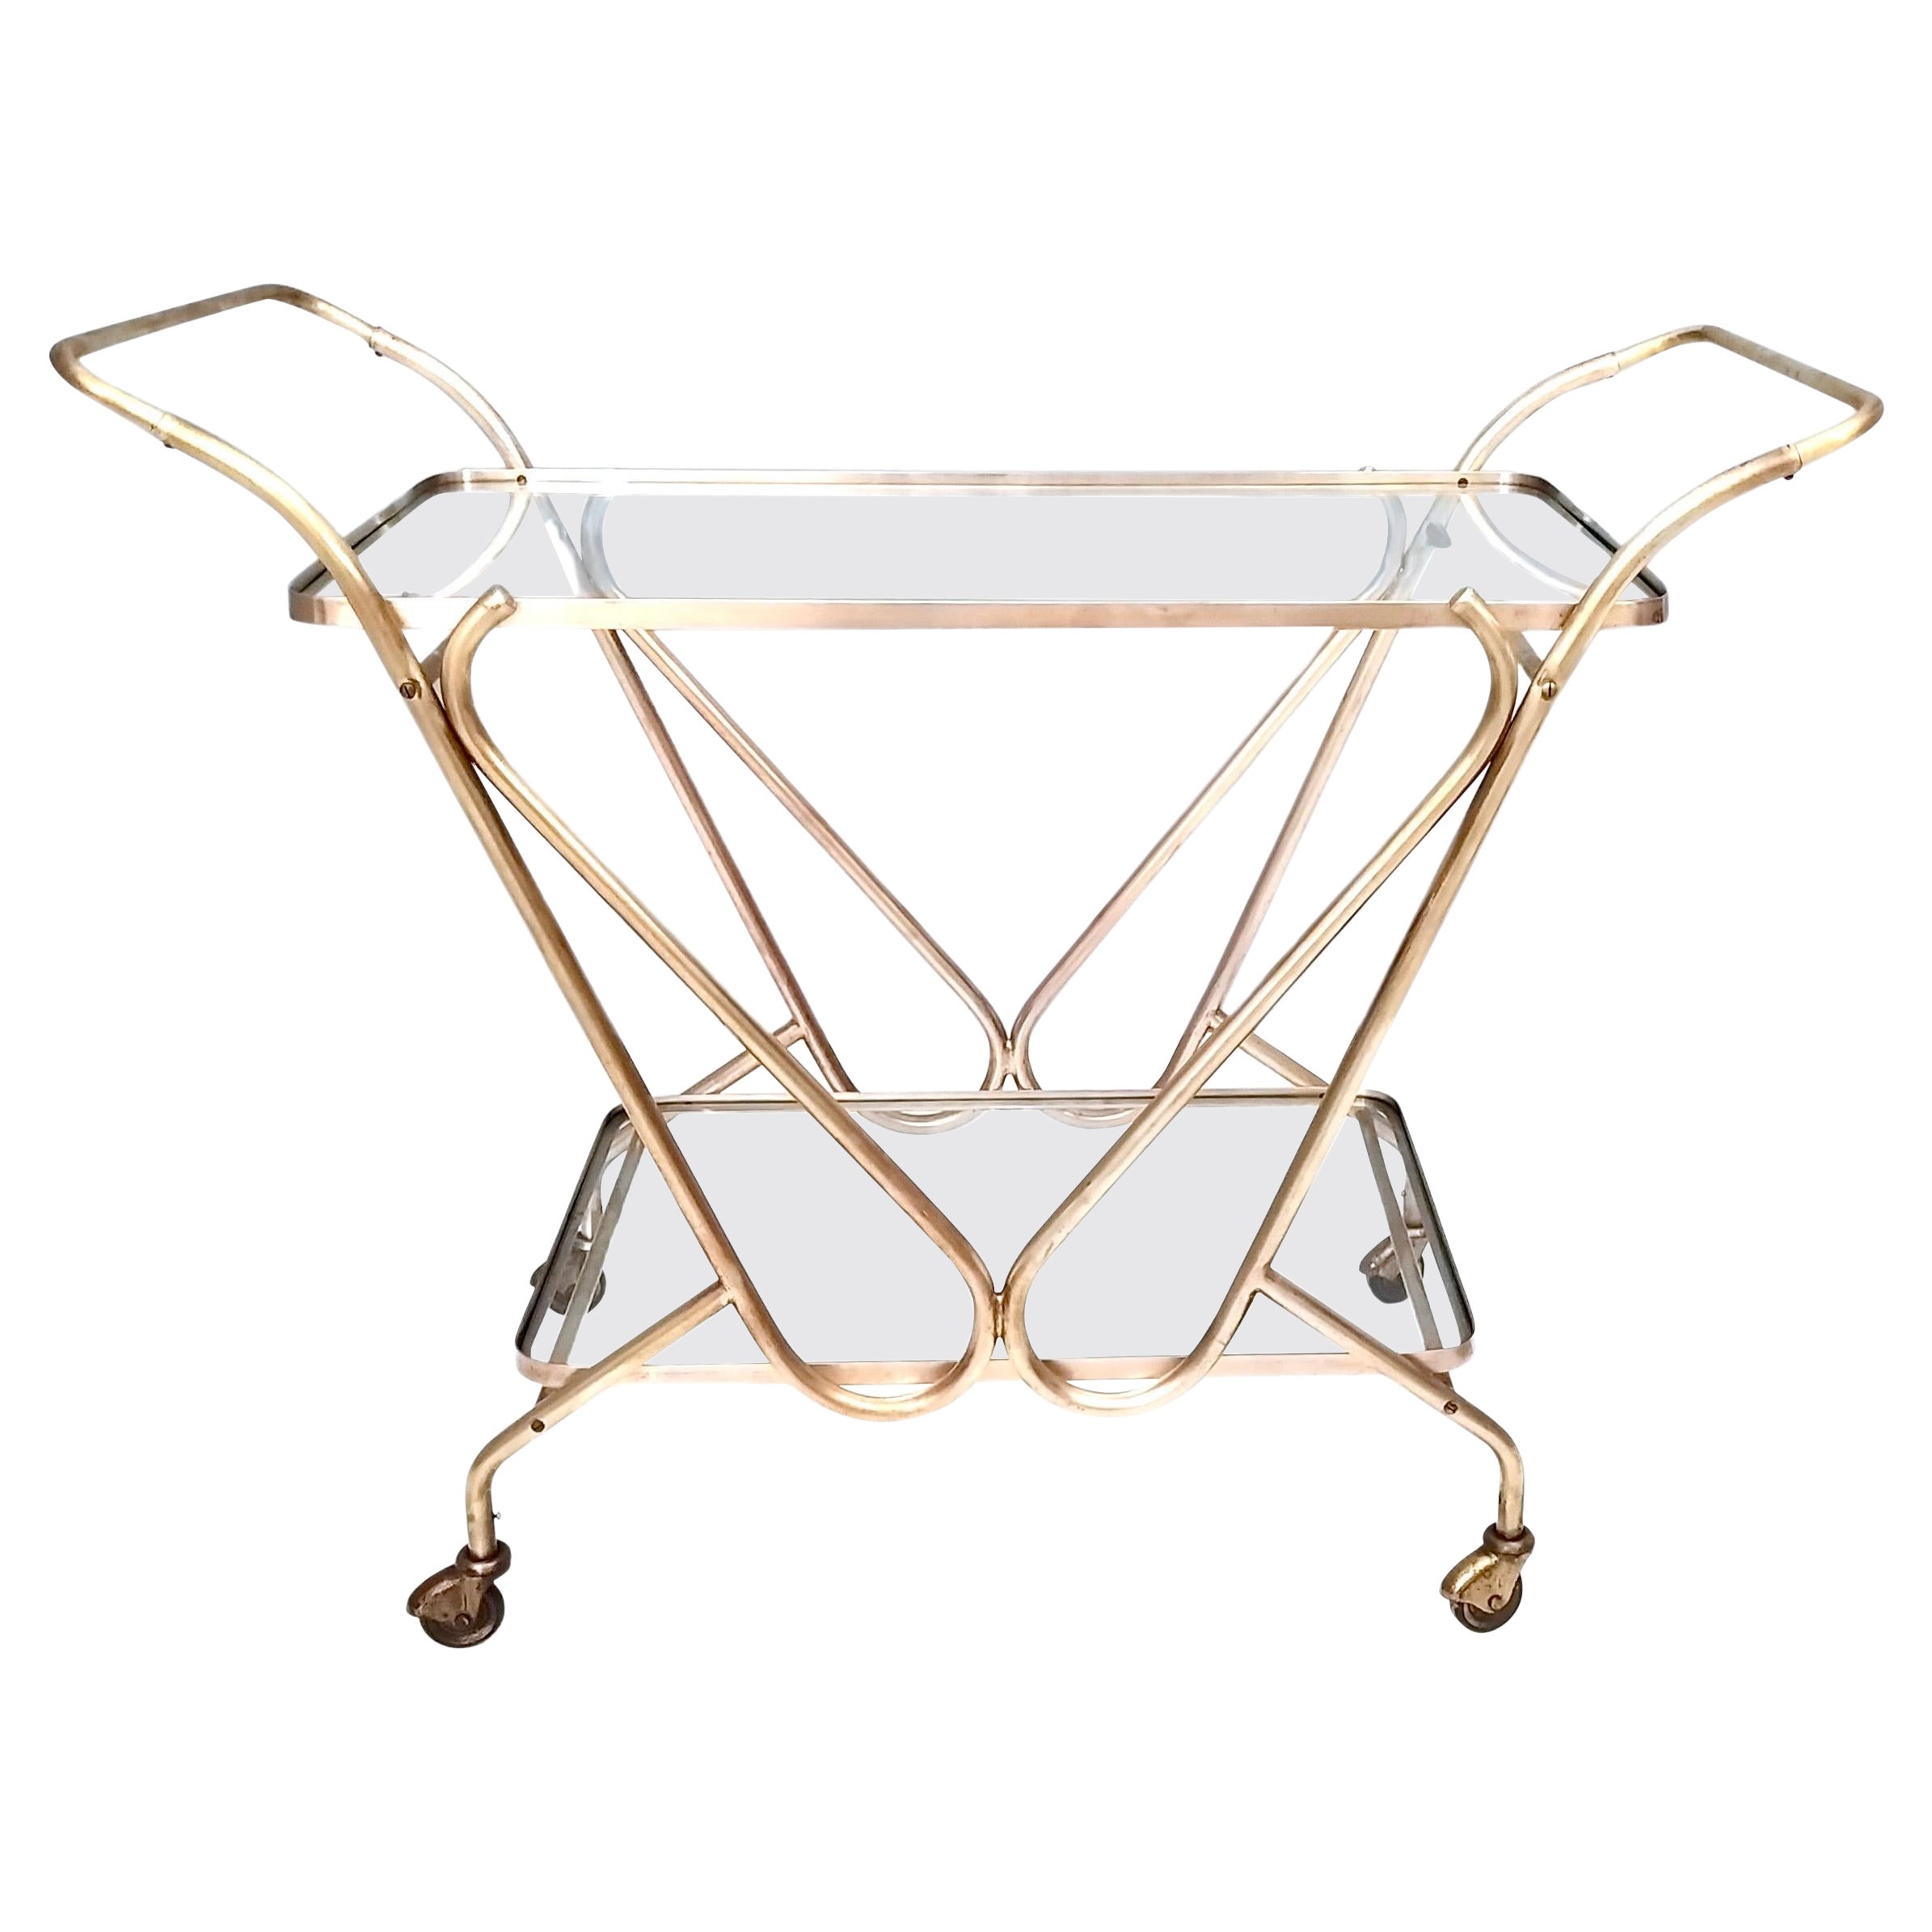 Vintage Brass Serving Cart with Glass Shelves, Italy